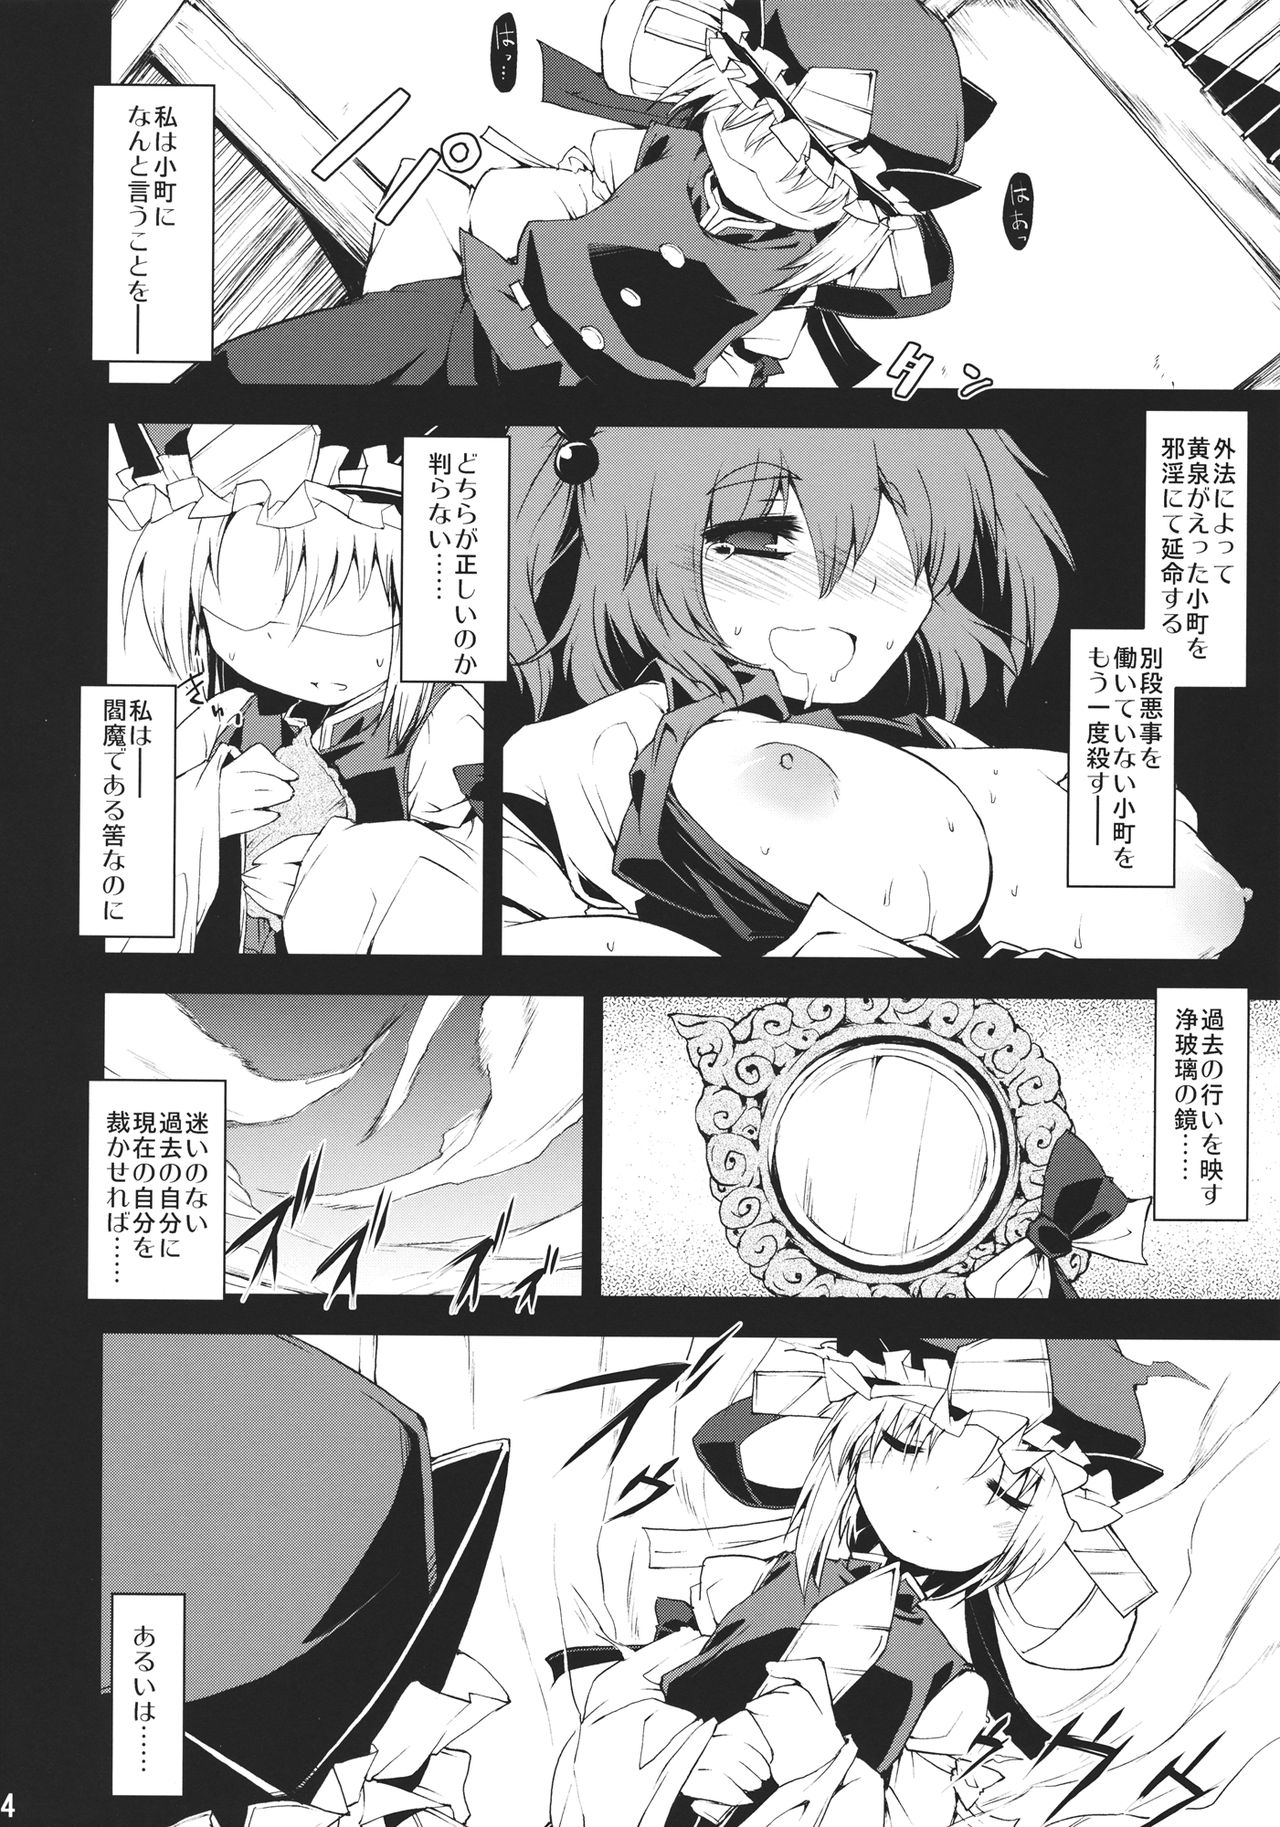 (C78) [Include (Foolest)] Saimin Ihen 5 ~Blind Justice~ (Touhou Project) (C78) [IncluDe (ふぅりすと)] 催眠異変 伍 ~Blind Justice~ (東方Project)